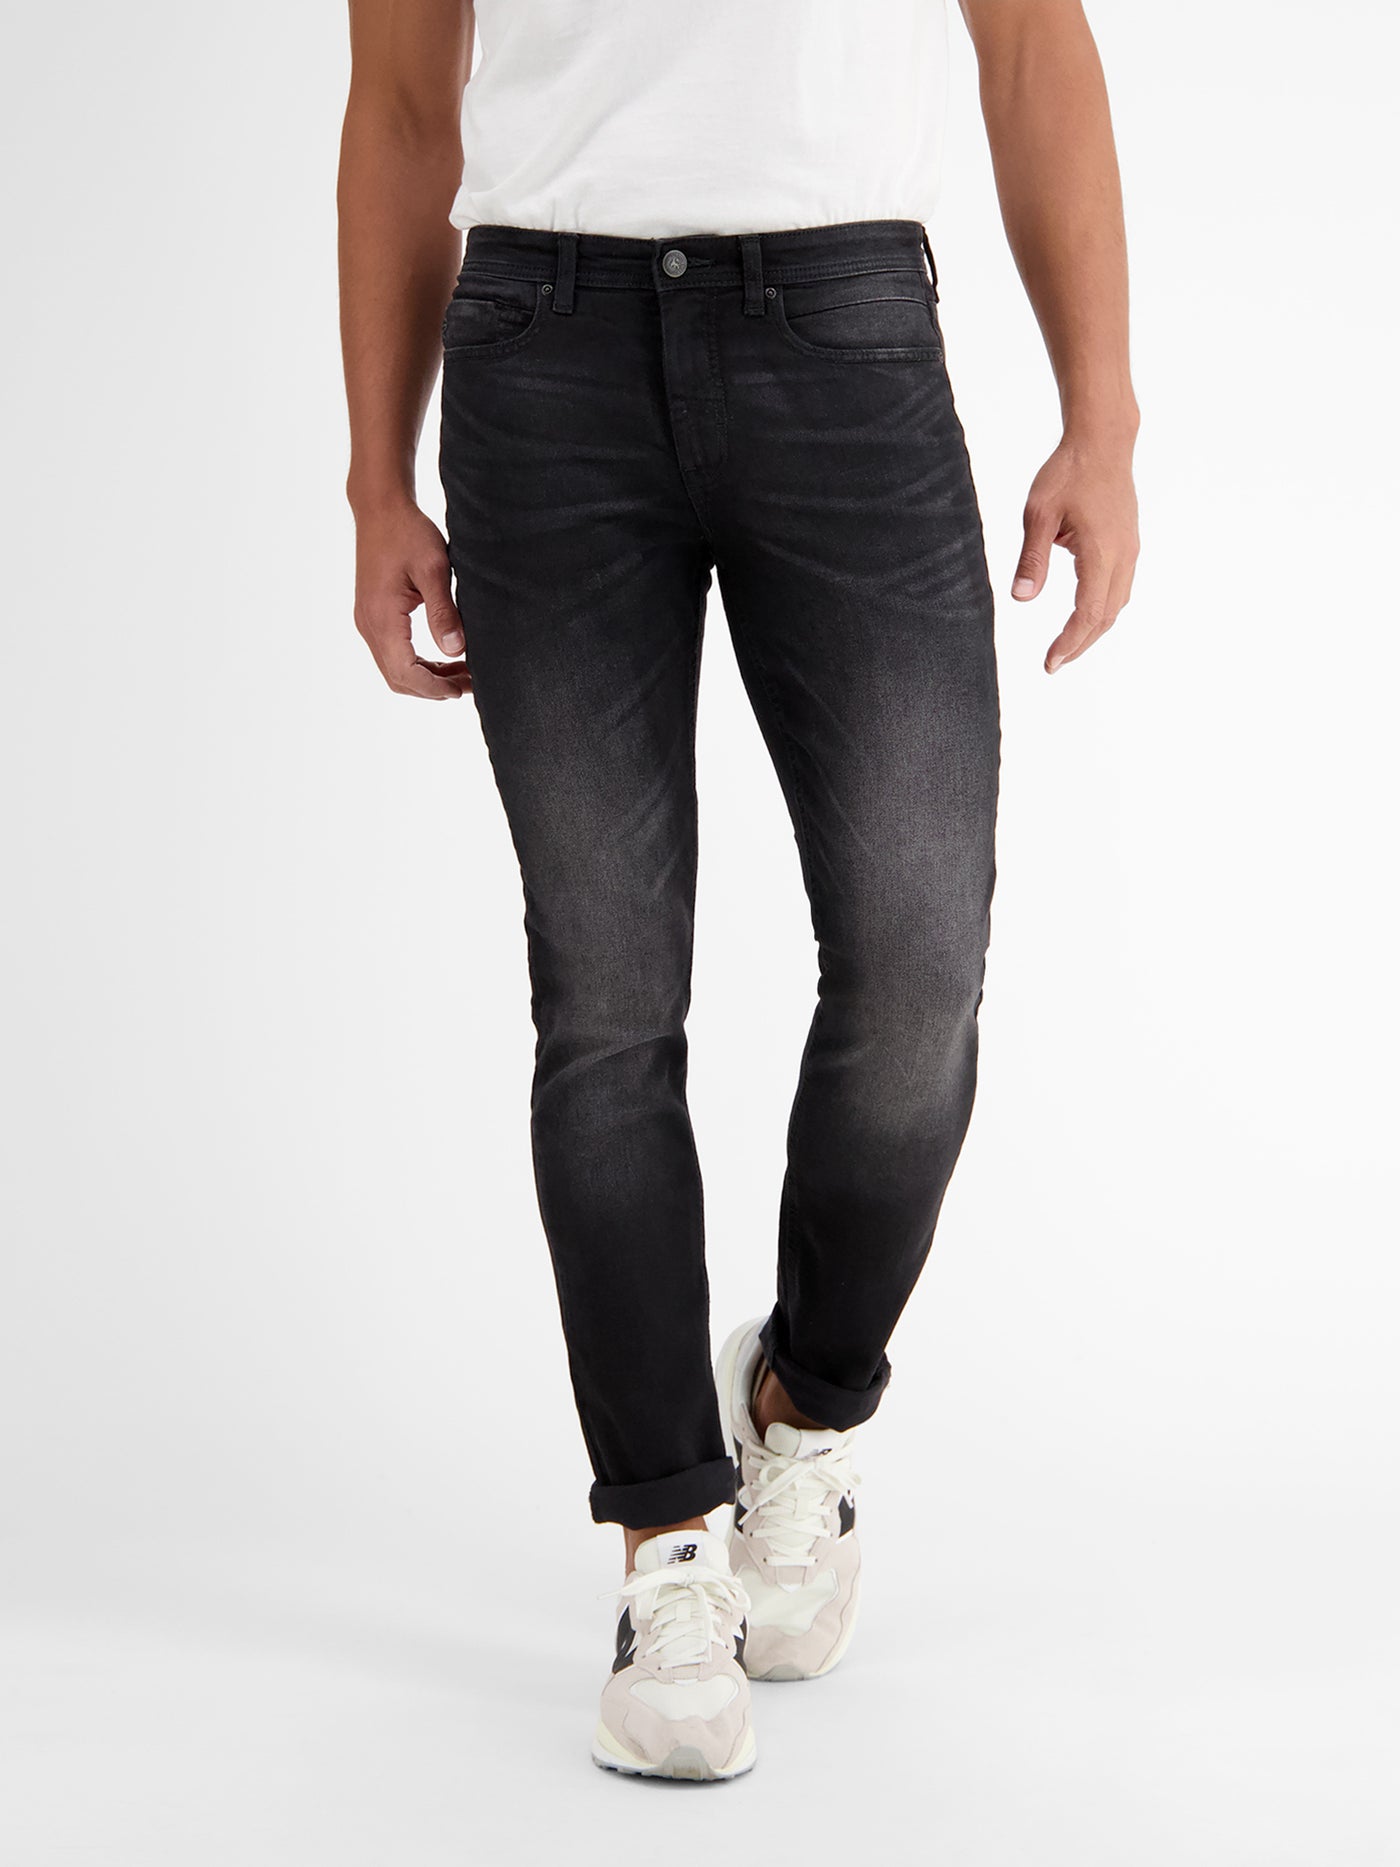 BAXTER 5-Pocket-Denim im Used-Look, RELAXED FIT, black